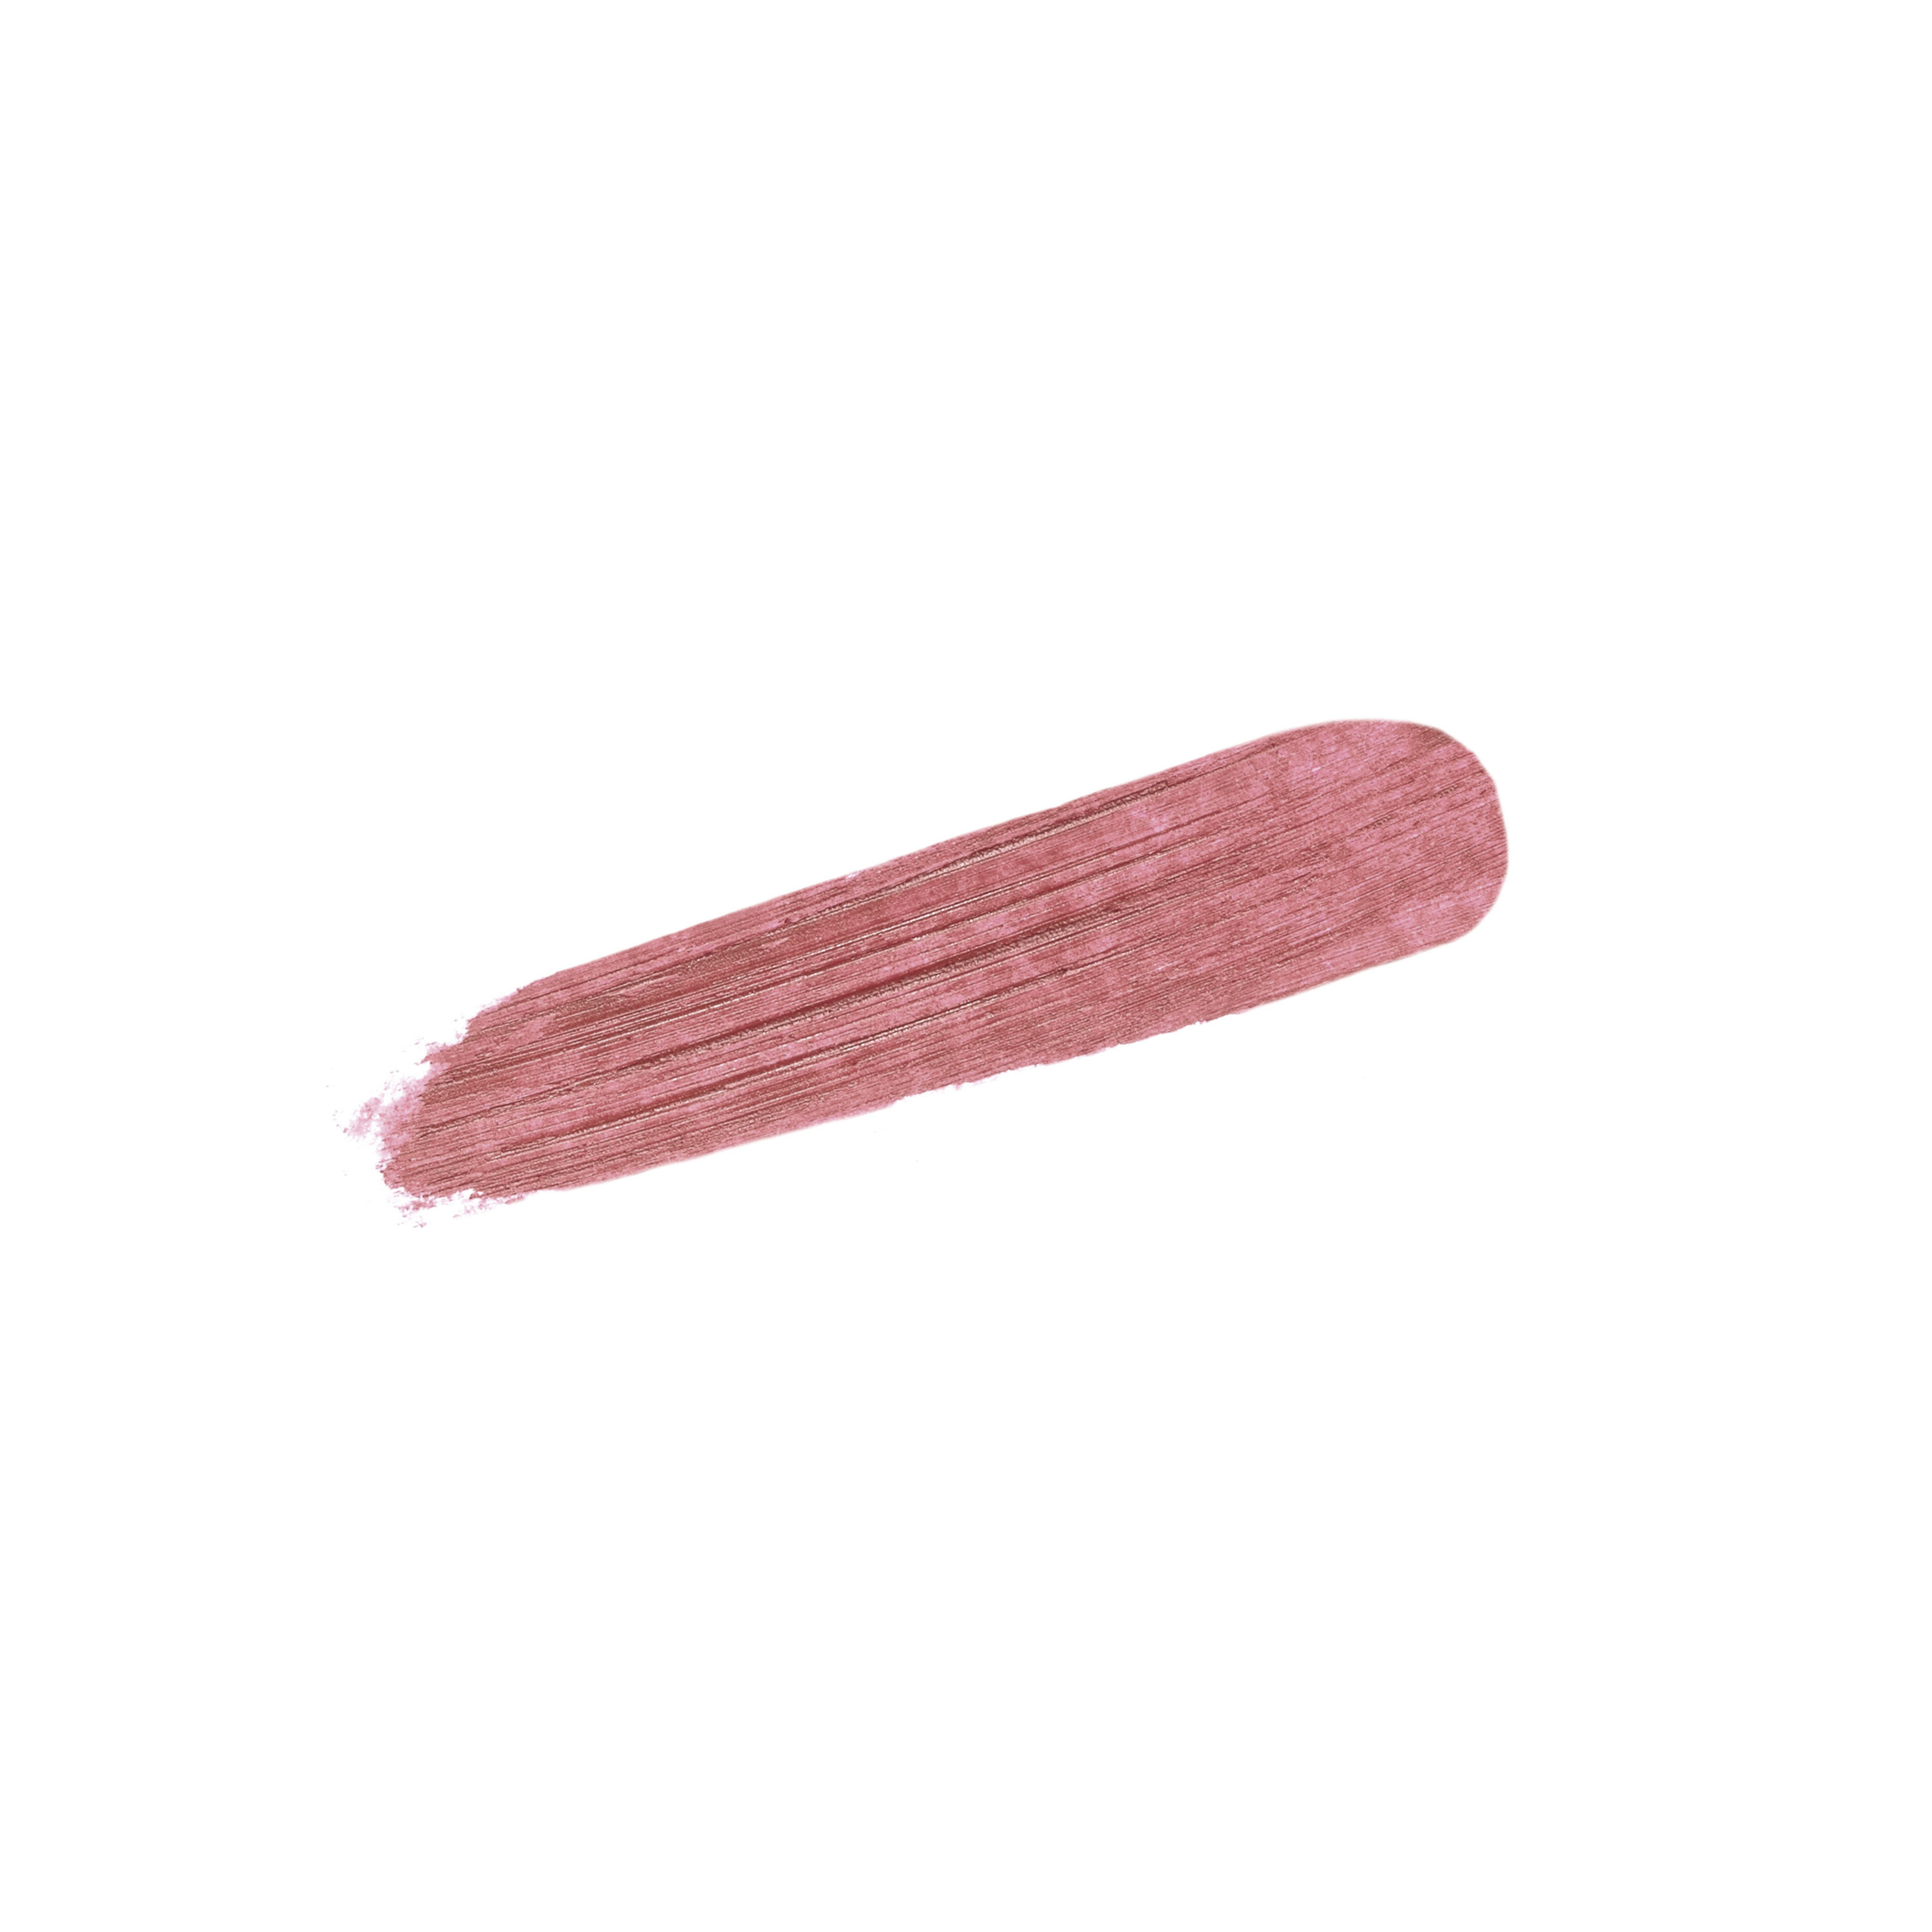 Phyto-Lip Twist, N°22 Burgundy - Rosso, large image number 2